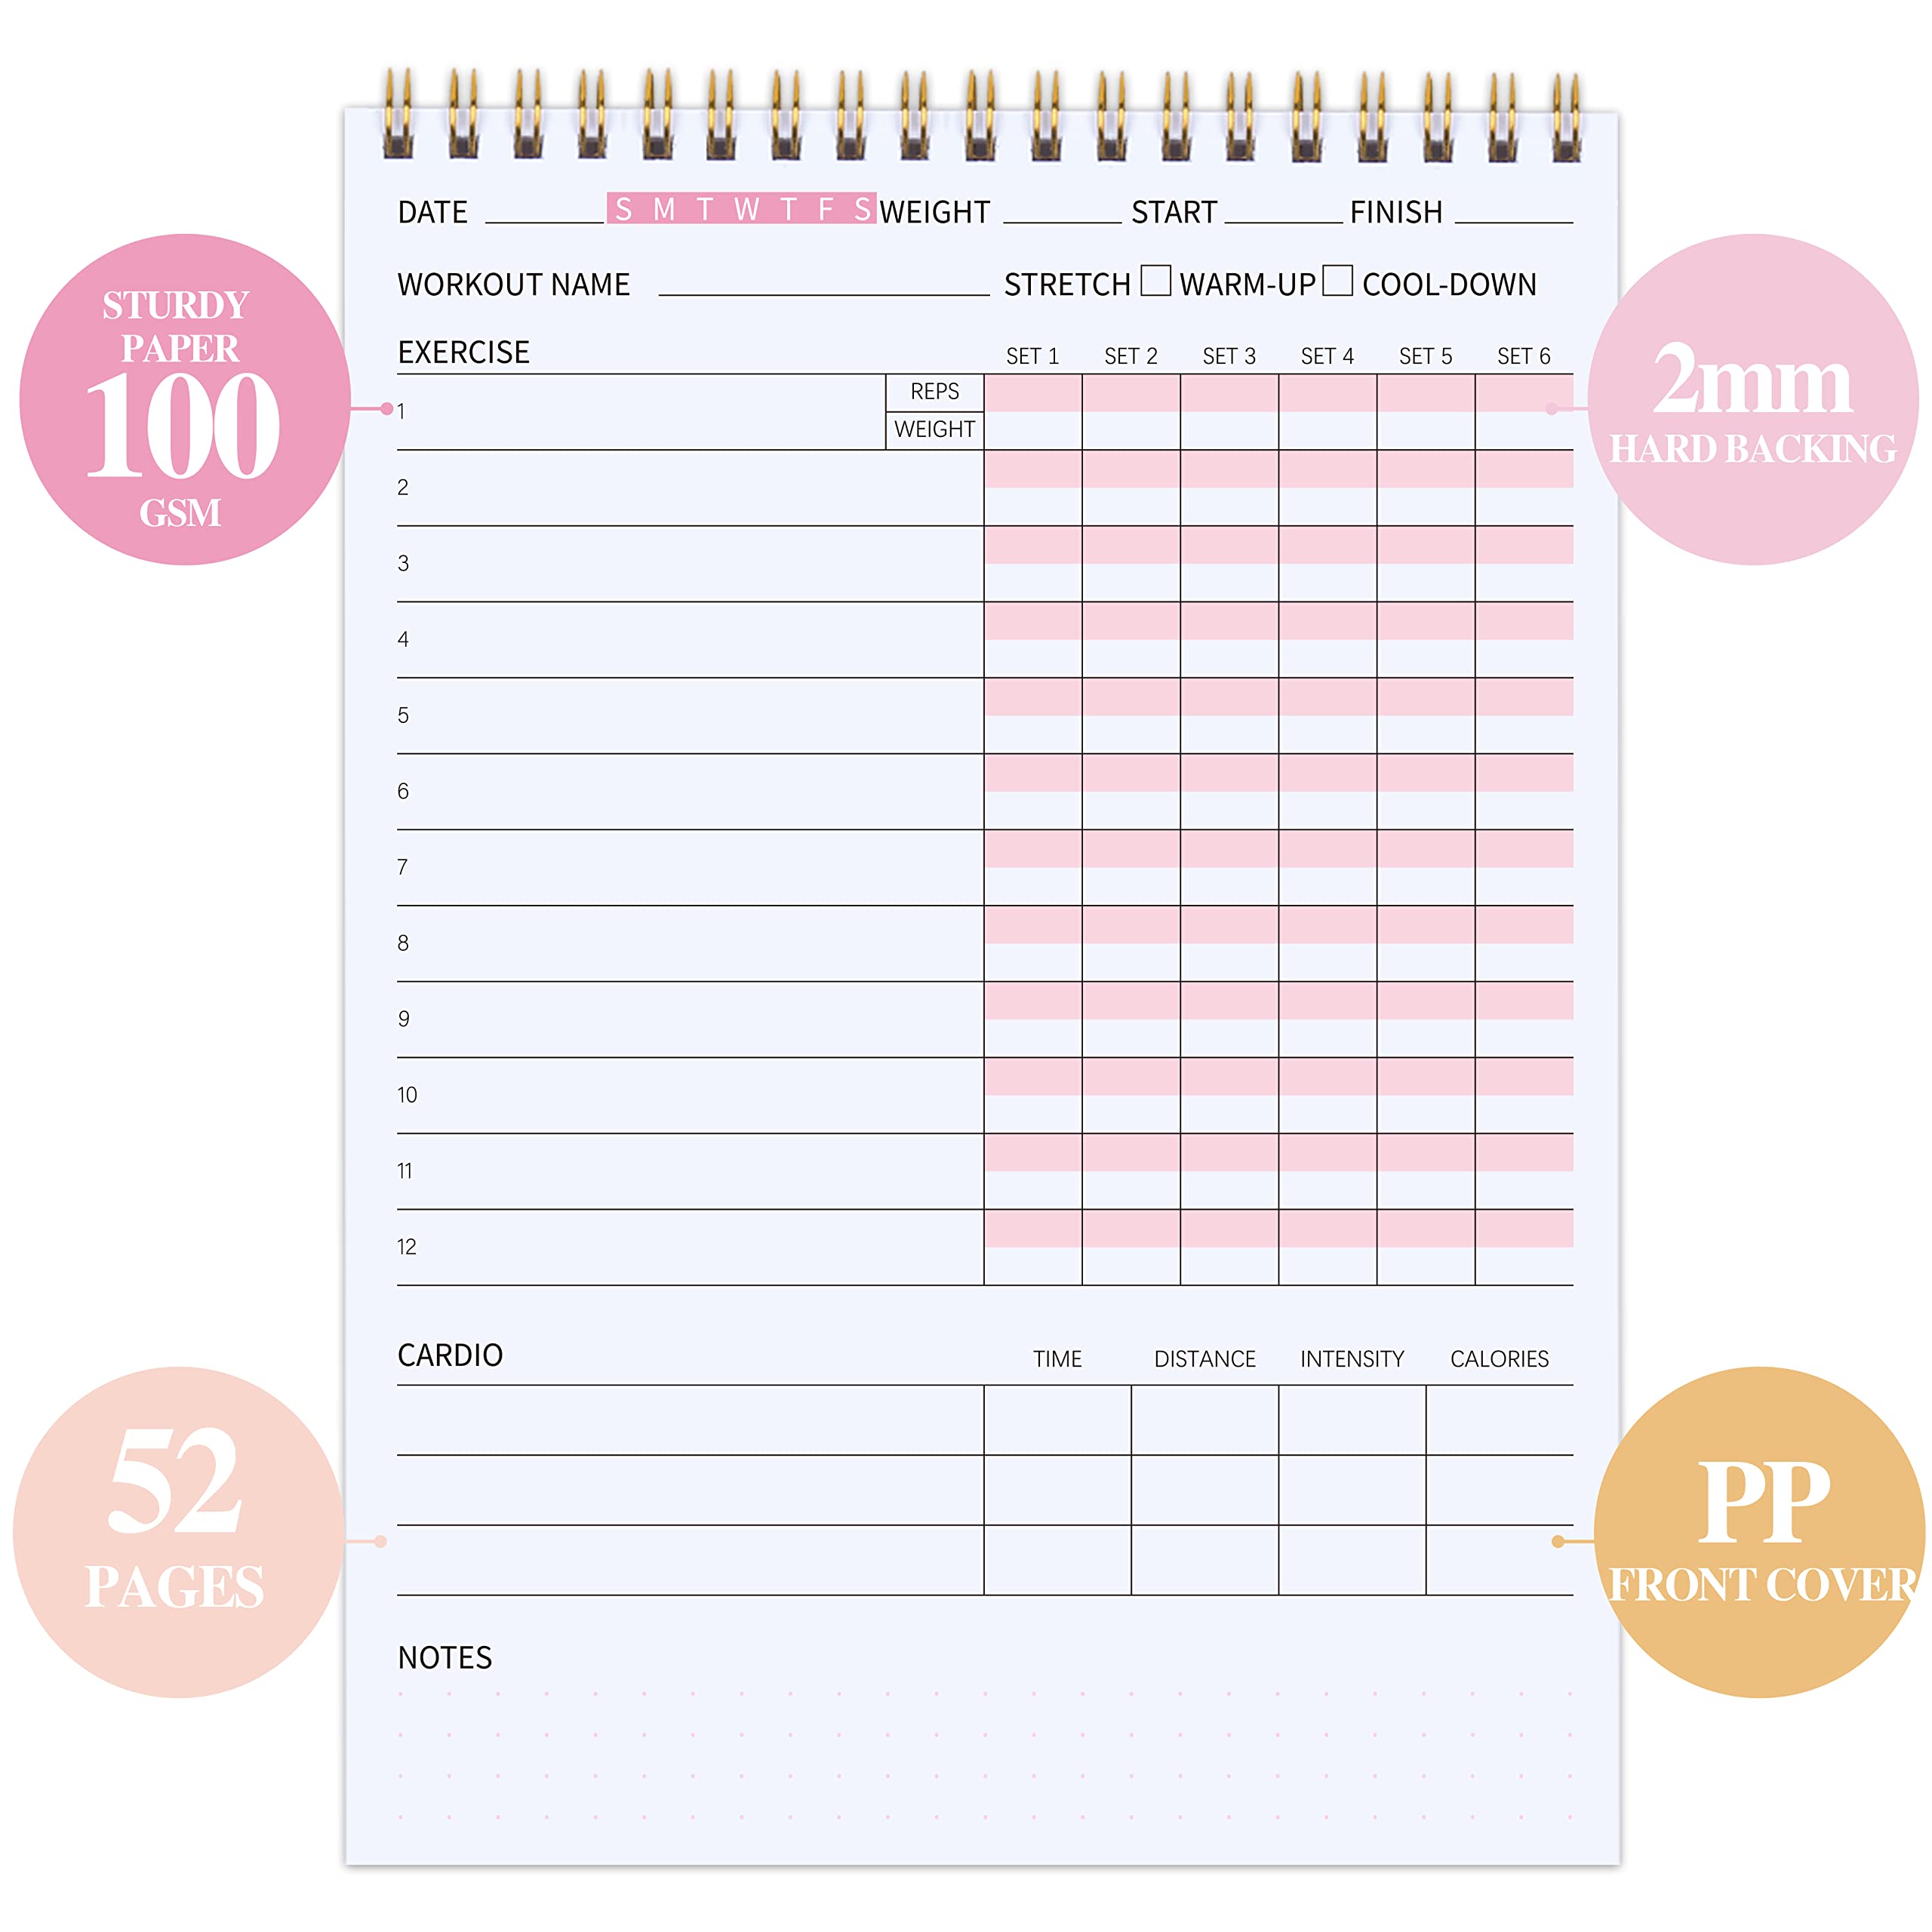 Fitness Journal Workout Planner Notepad For Women & Men Weight Loss,Daily Gym,Exercise Goals,Bodybuilding Progress,Wellness Tracker,6.7 X 9.4 inches, 60 sheets